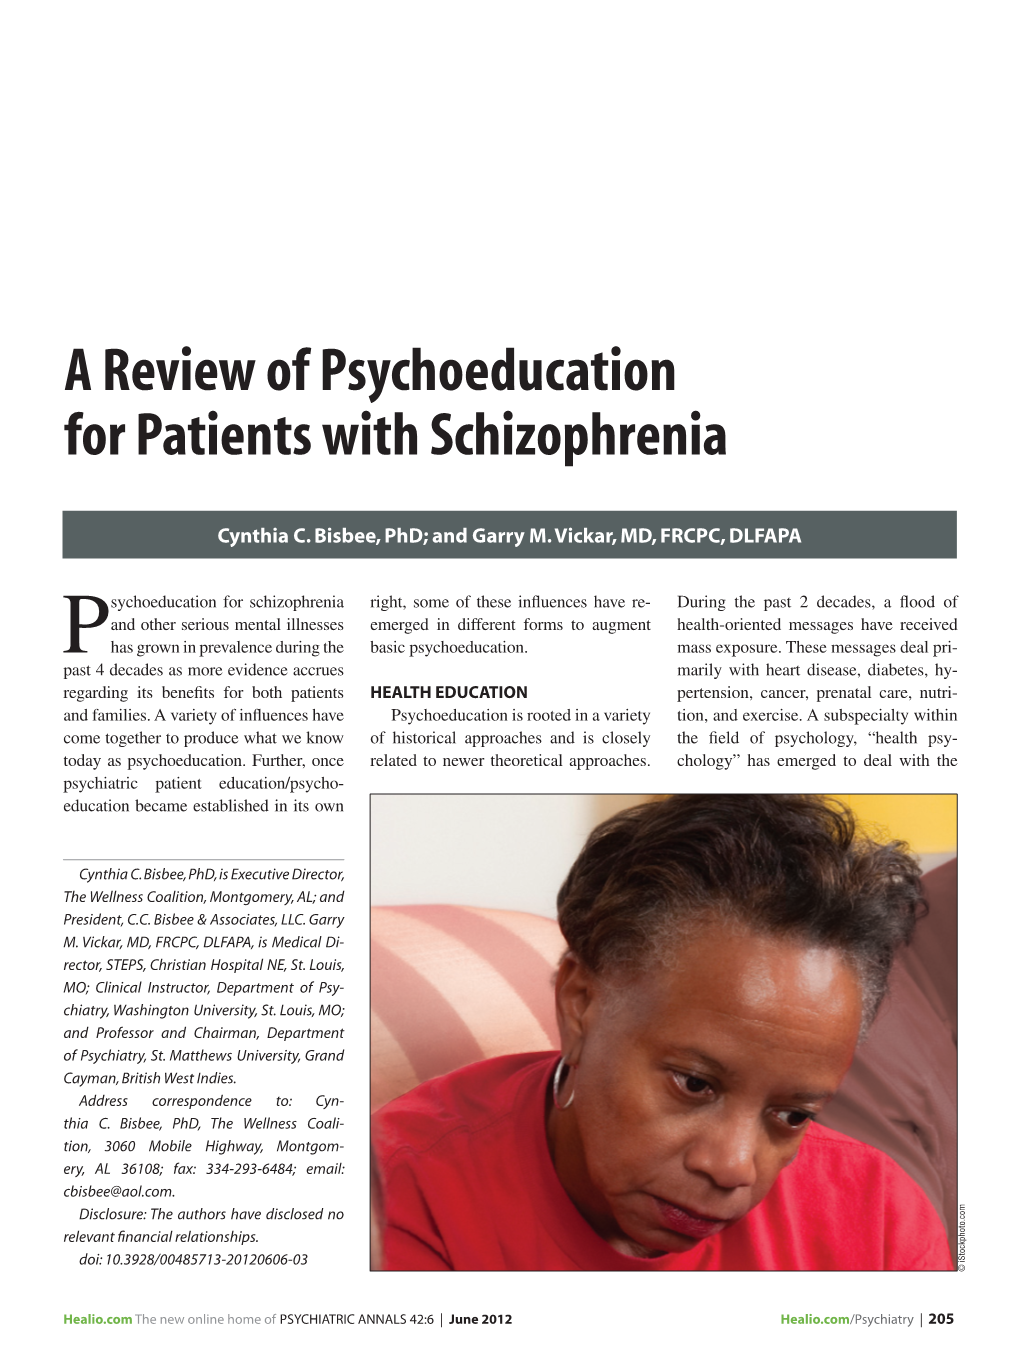 A Review of Psychoeducation for Patients with Schizophrenia